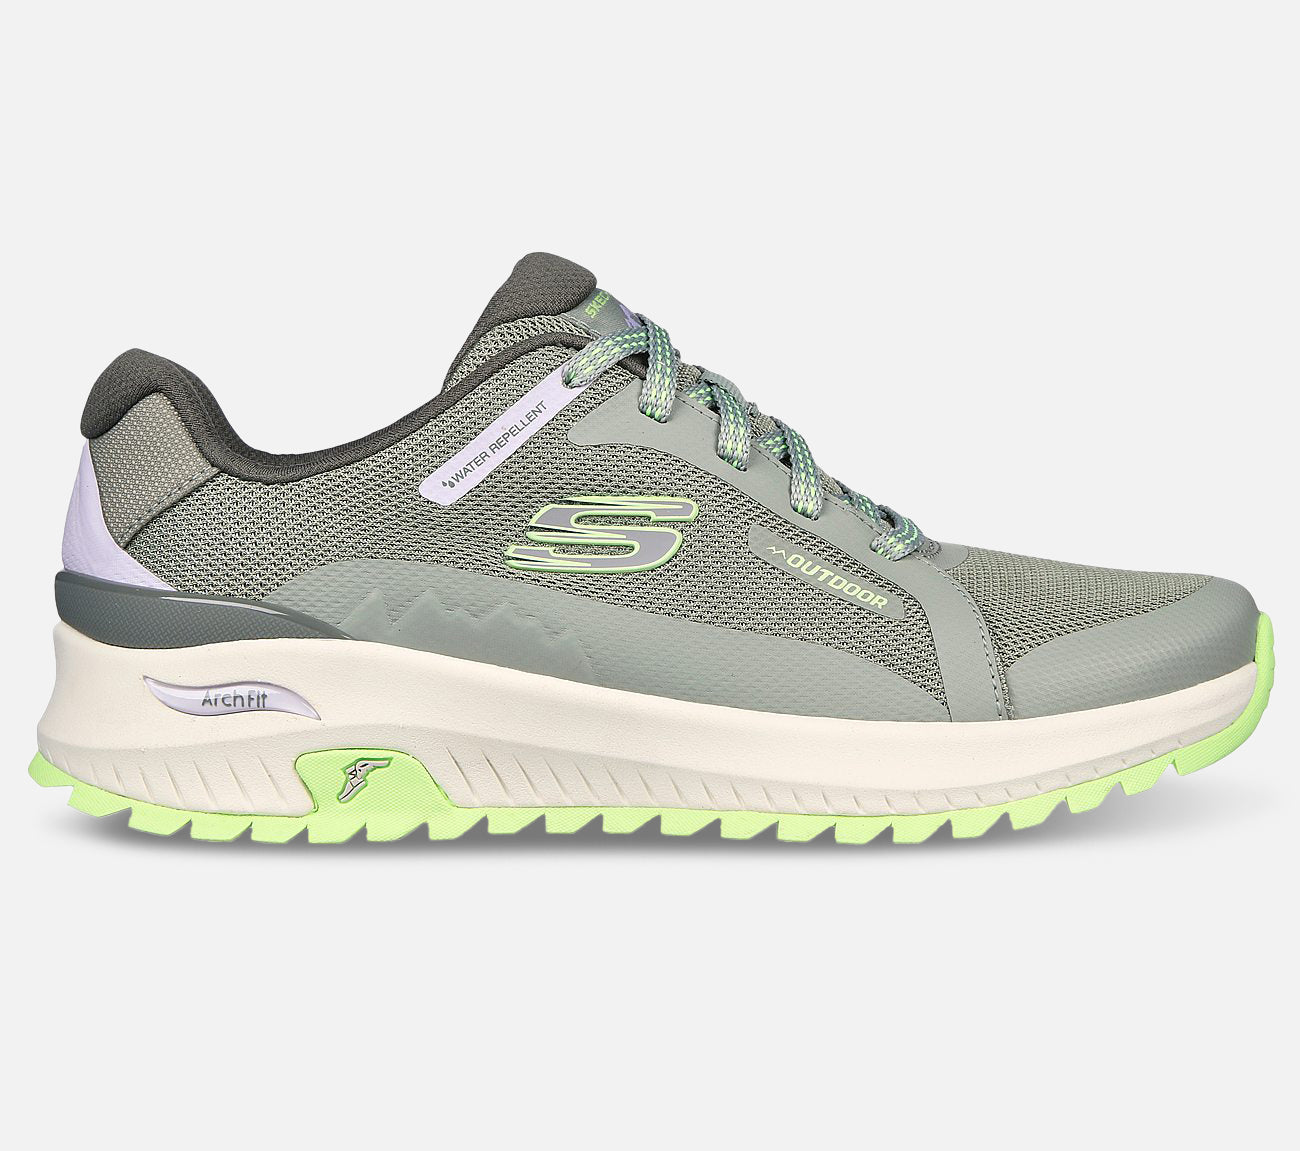 Arch Fit Discover - Water Repellent Shoe Skechers